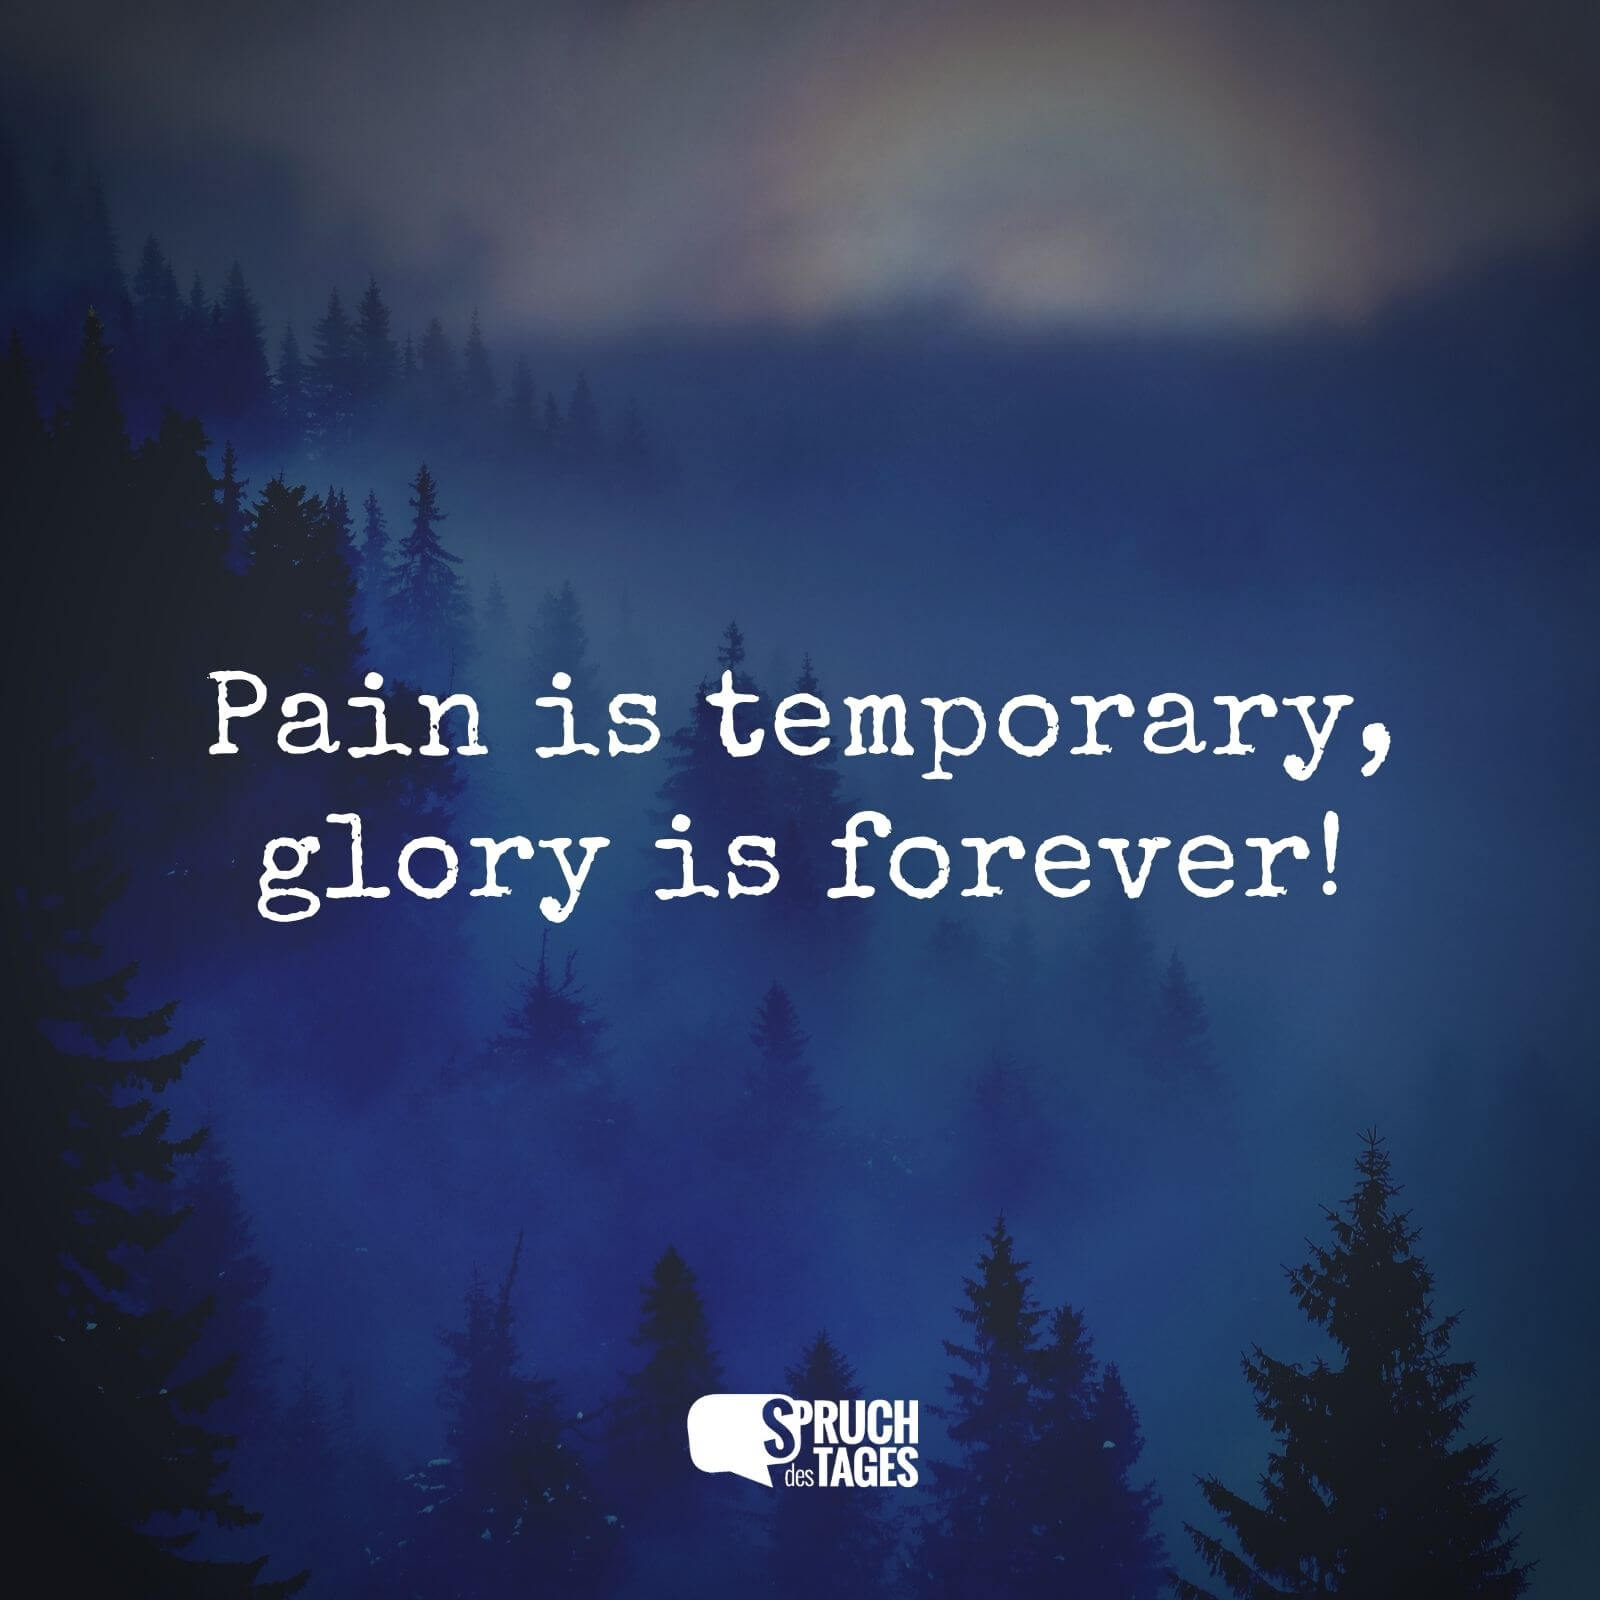 Pain is temporary, glory is forever!